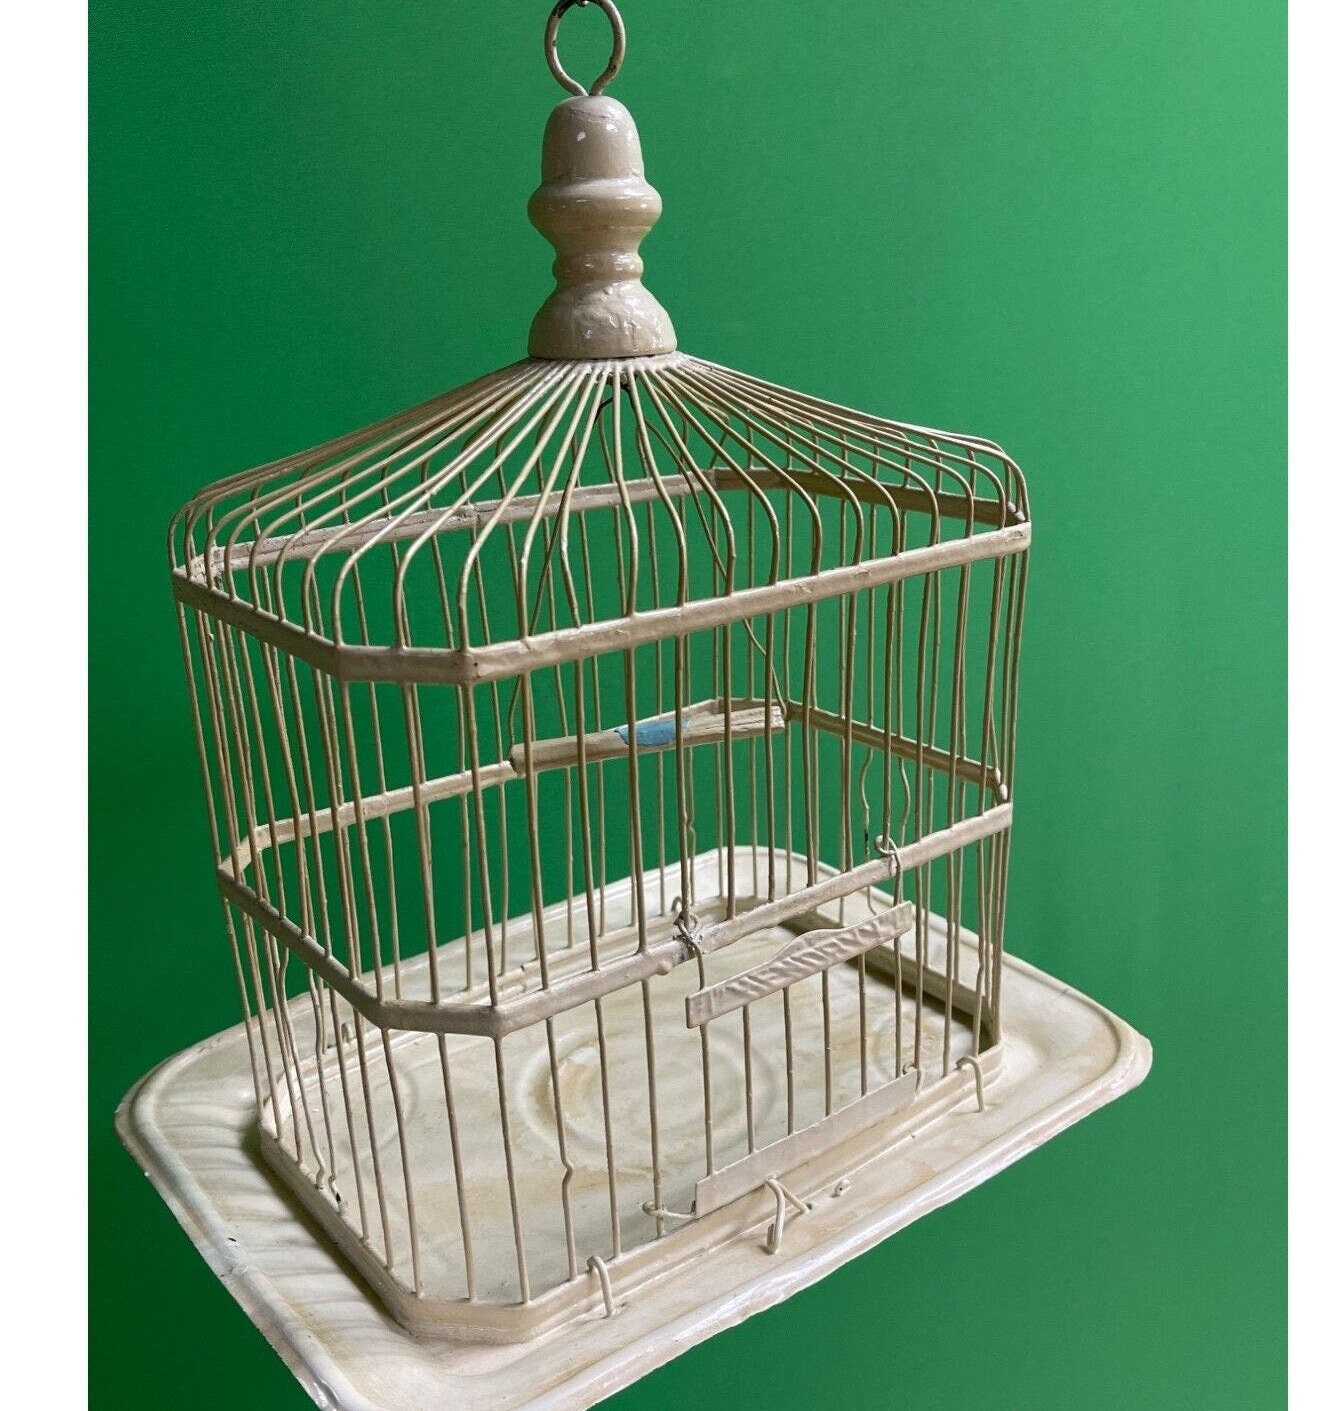 Antique Hendryx Bird Cage with original glass feeders - antiques - by owner  - collectibles sale - craigslist